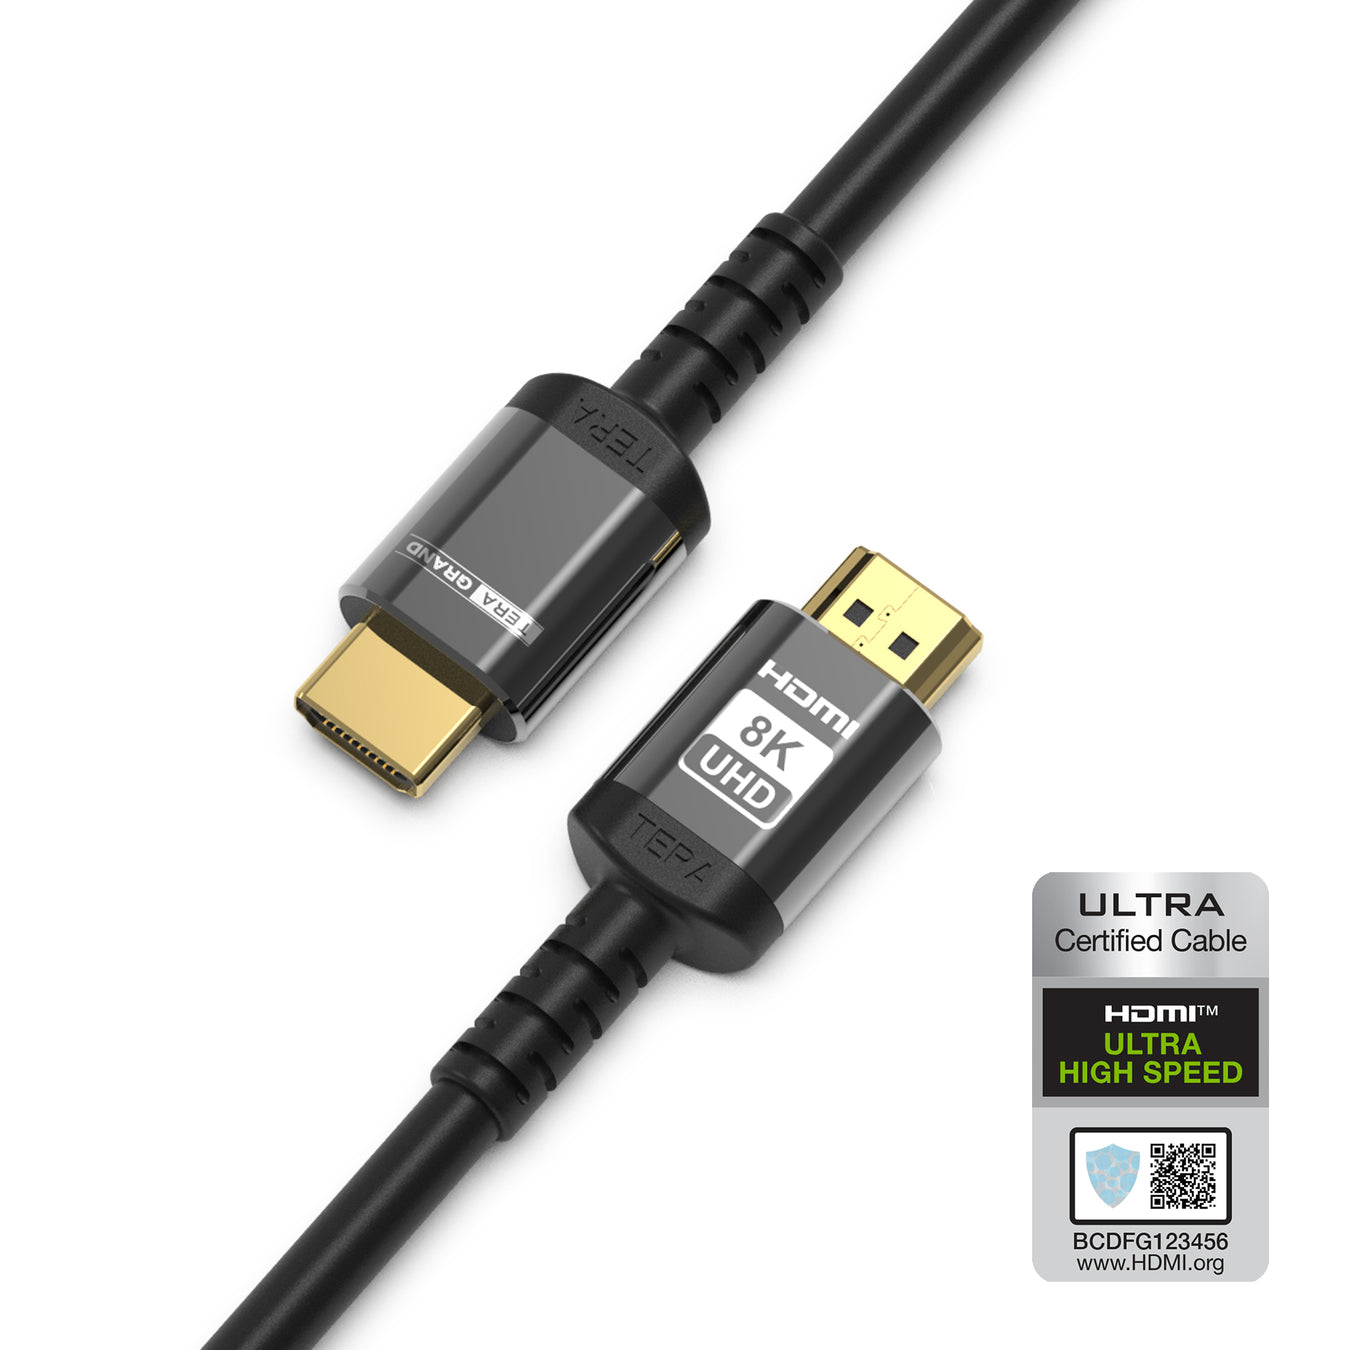 4K Premium and 8K Ultra High Speed HDMI Cables